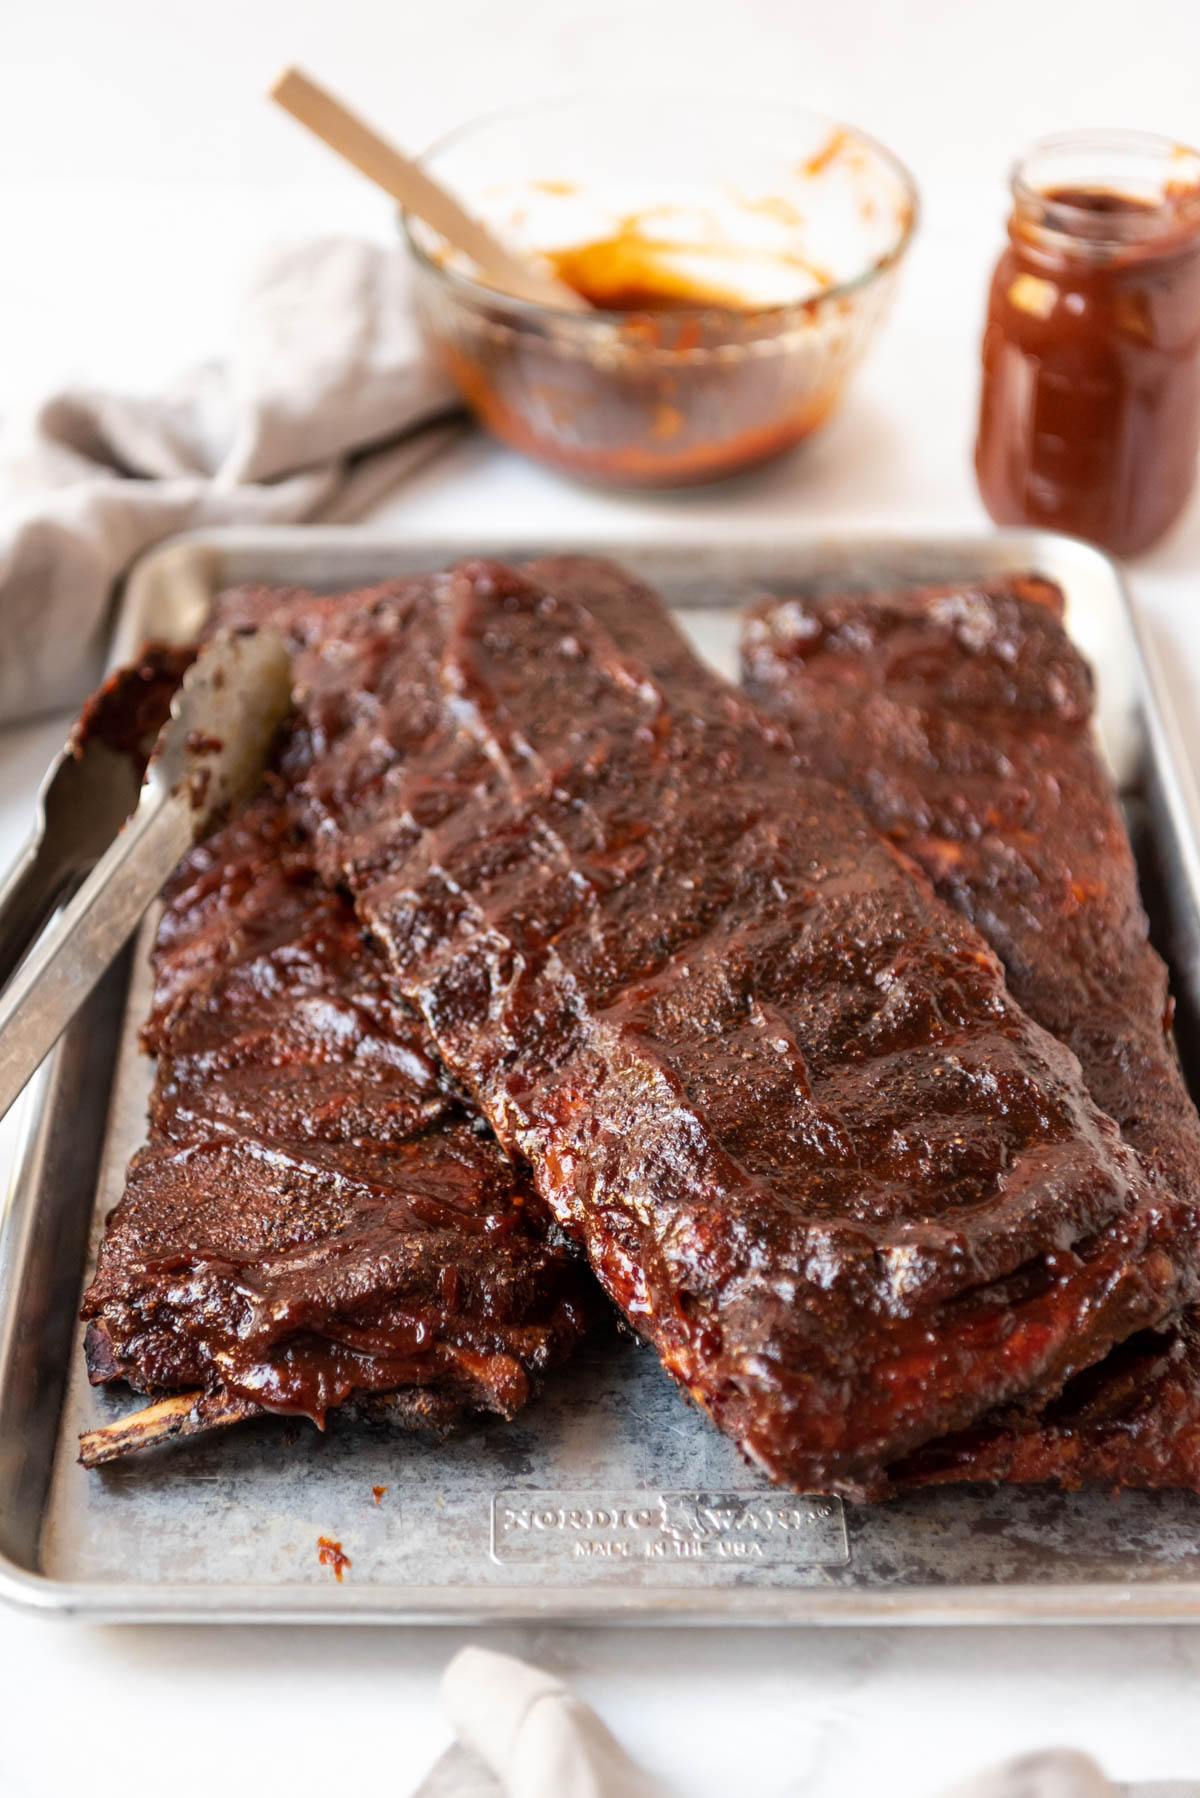 Cooked St. Louis-style ribs on a baking sheet in front of bowls of Kansas City BBQ sauce.